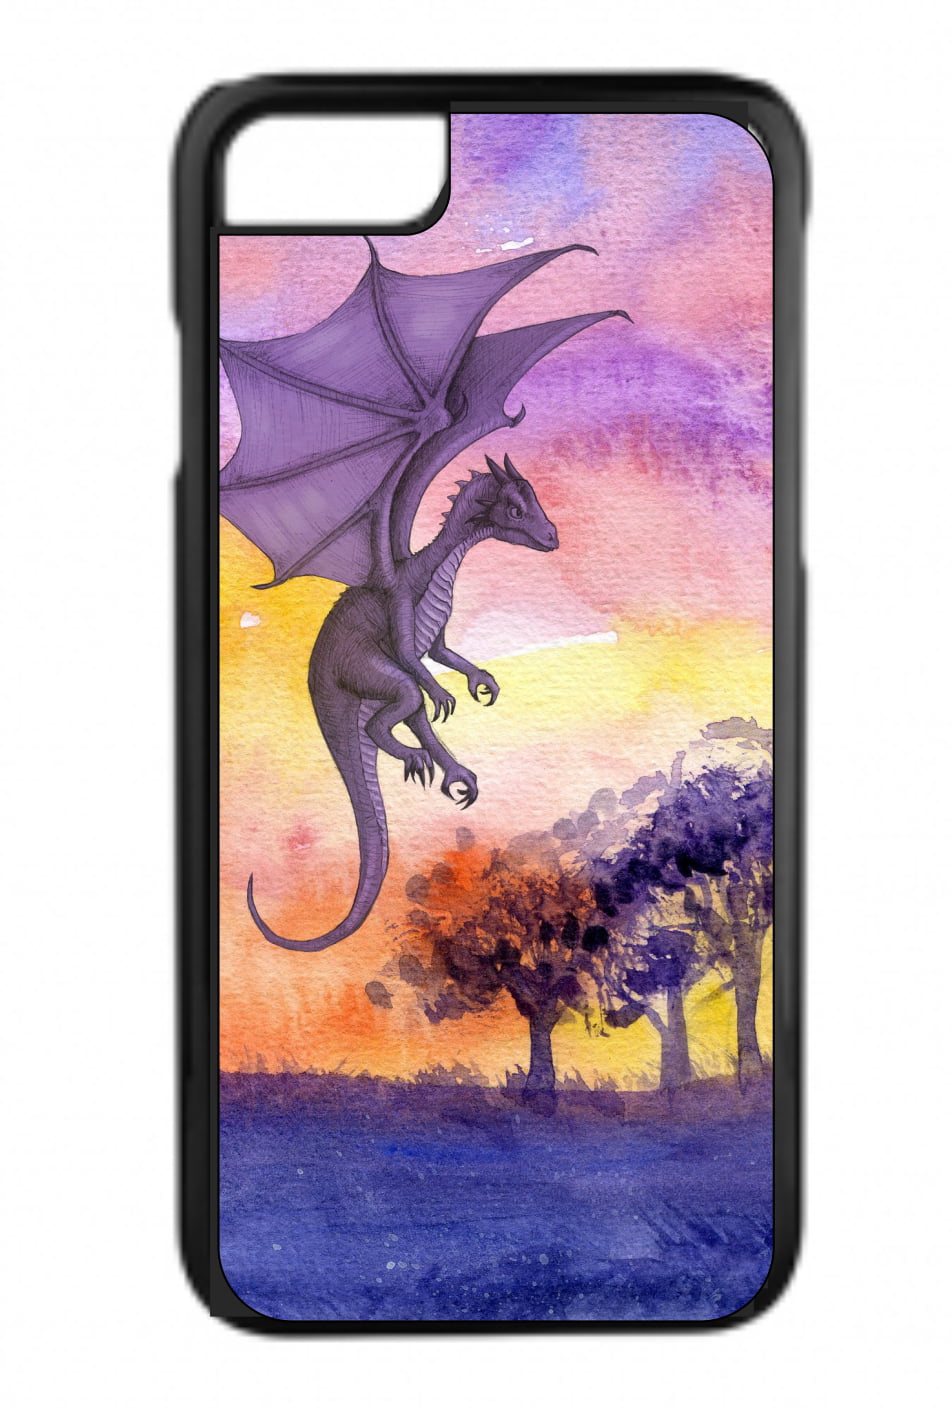 Watercolor Purple Dragon Design Black Rubber Case for the Apple iPhone 6 / iPhone 6s - iPhone 6 Accessories - iPhone 6s Accessories